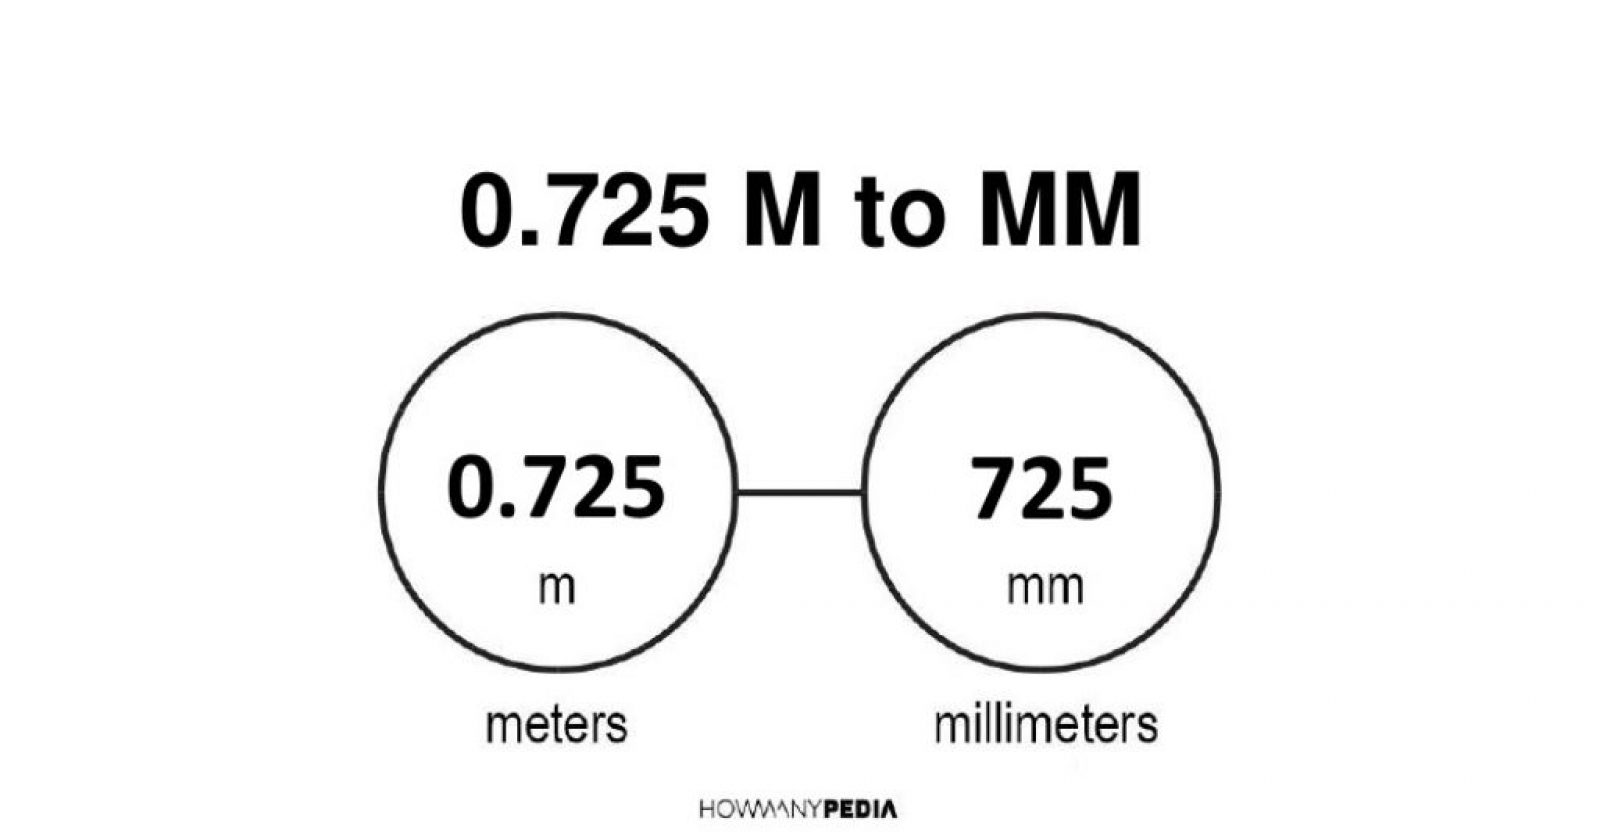 0.725 m to mm